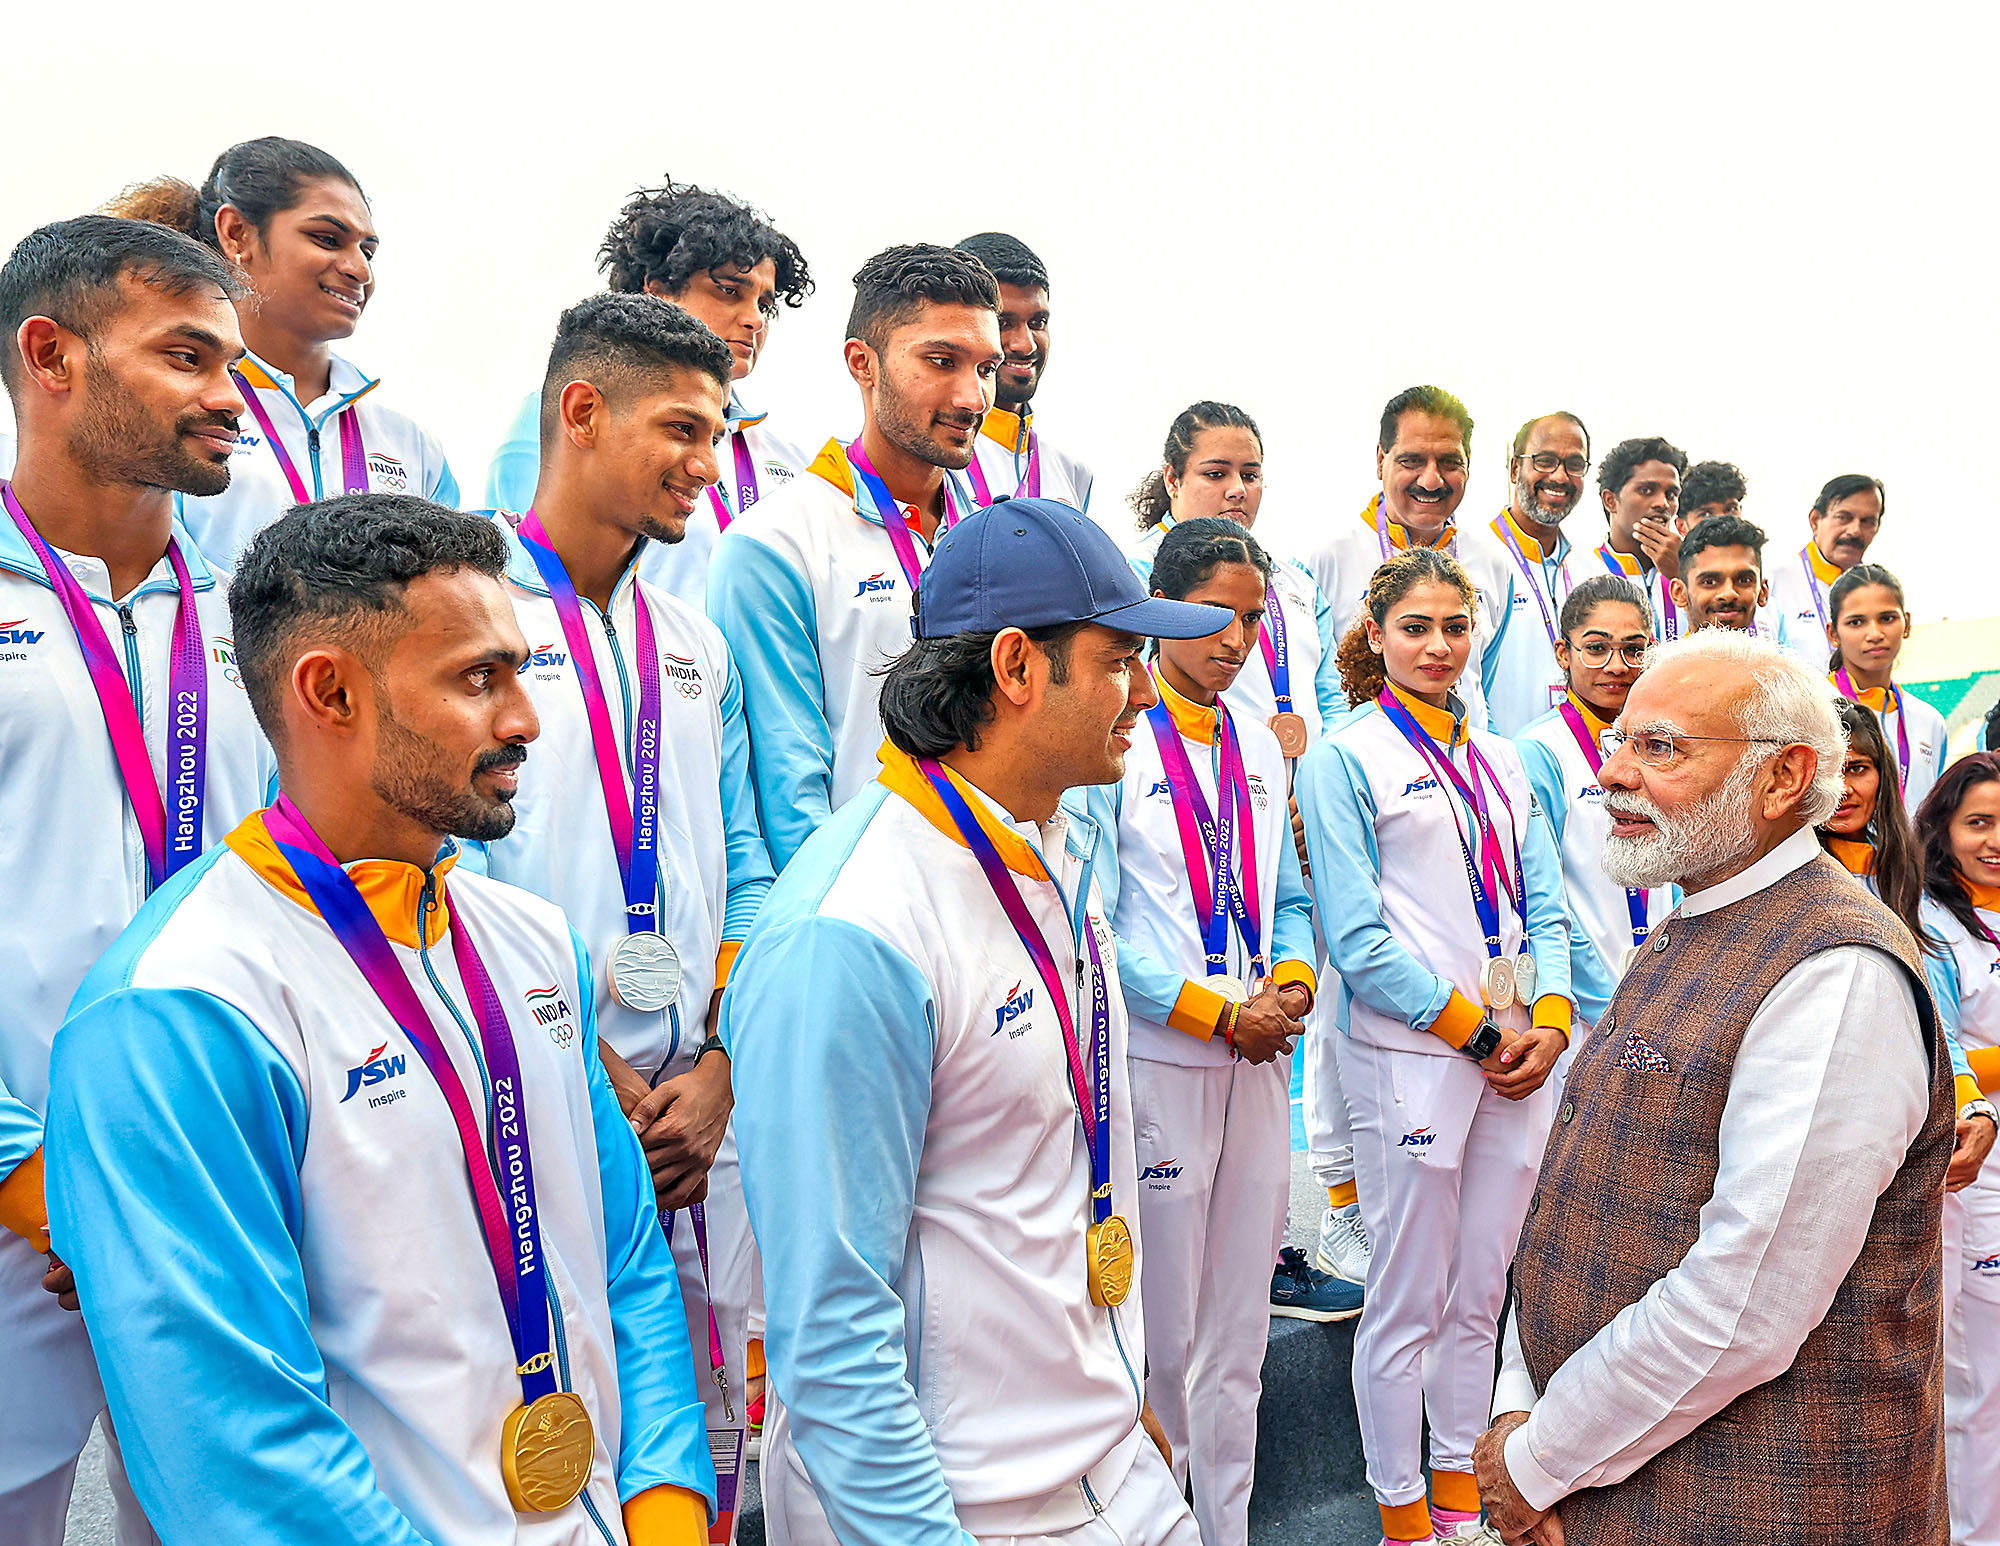 PM Modi interacts with Neeraj Chopra as other players look on.